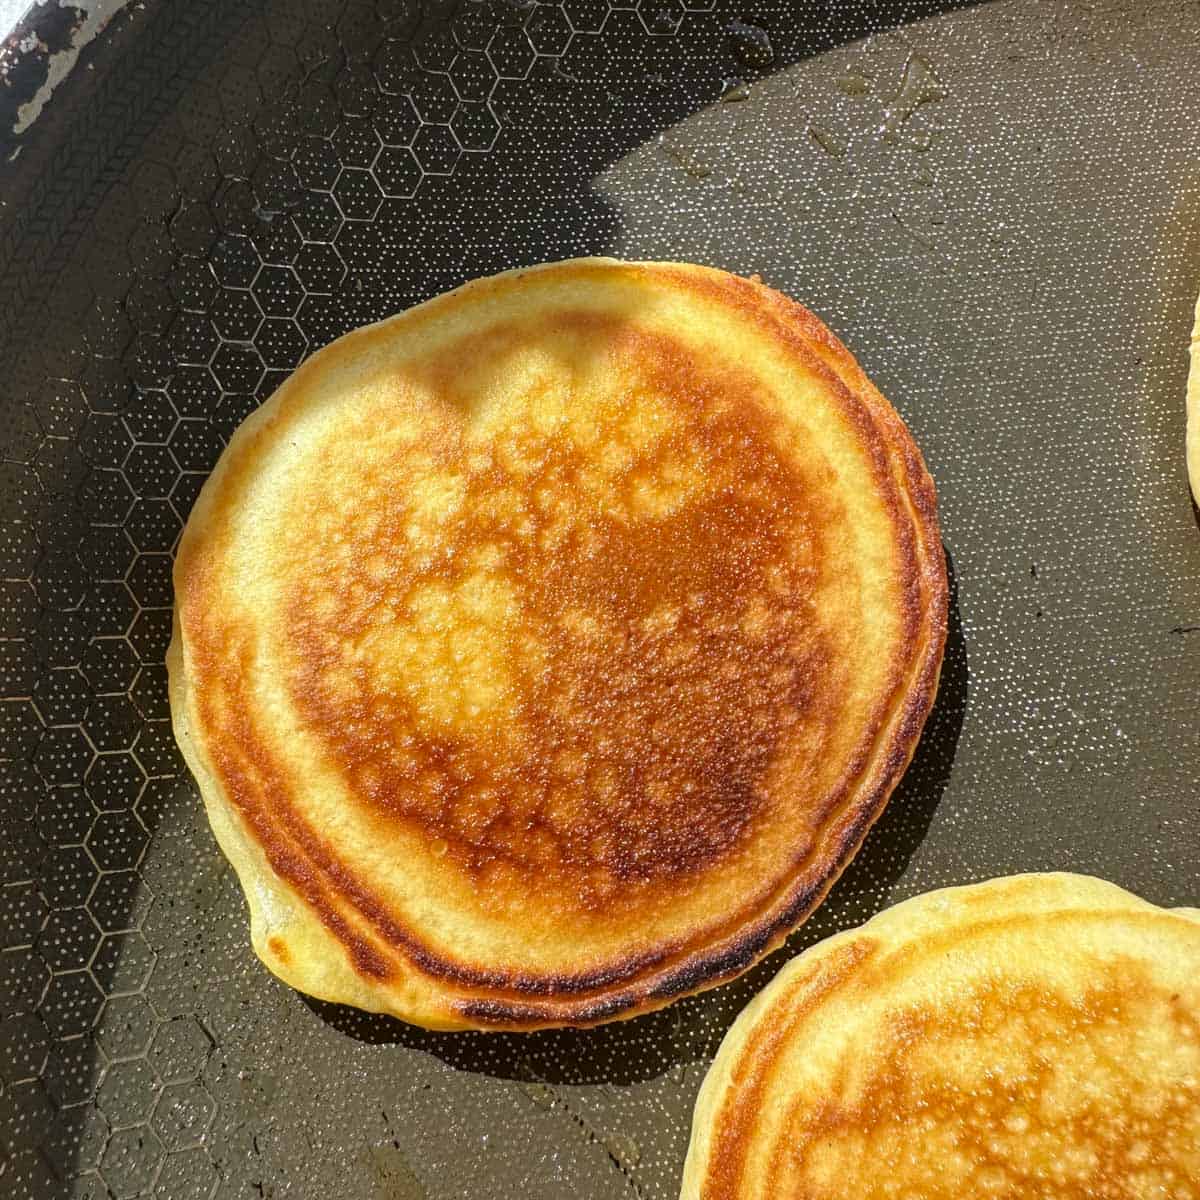 A golden pancake on a pan with other mini pancakes.